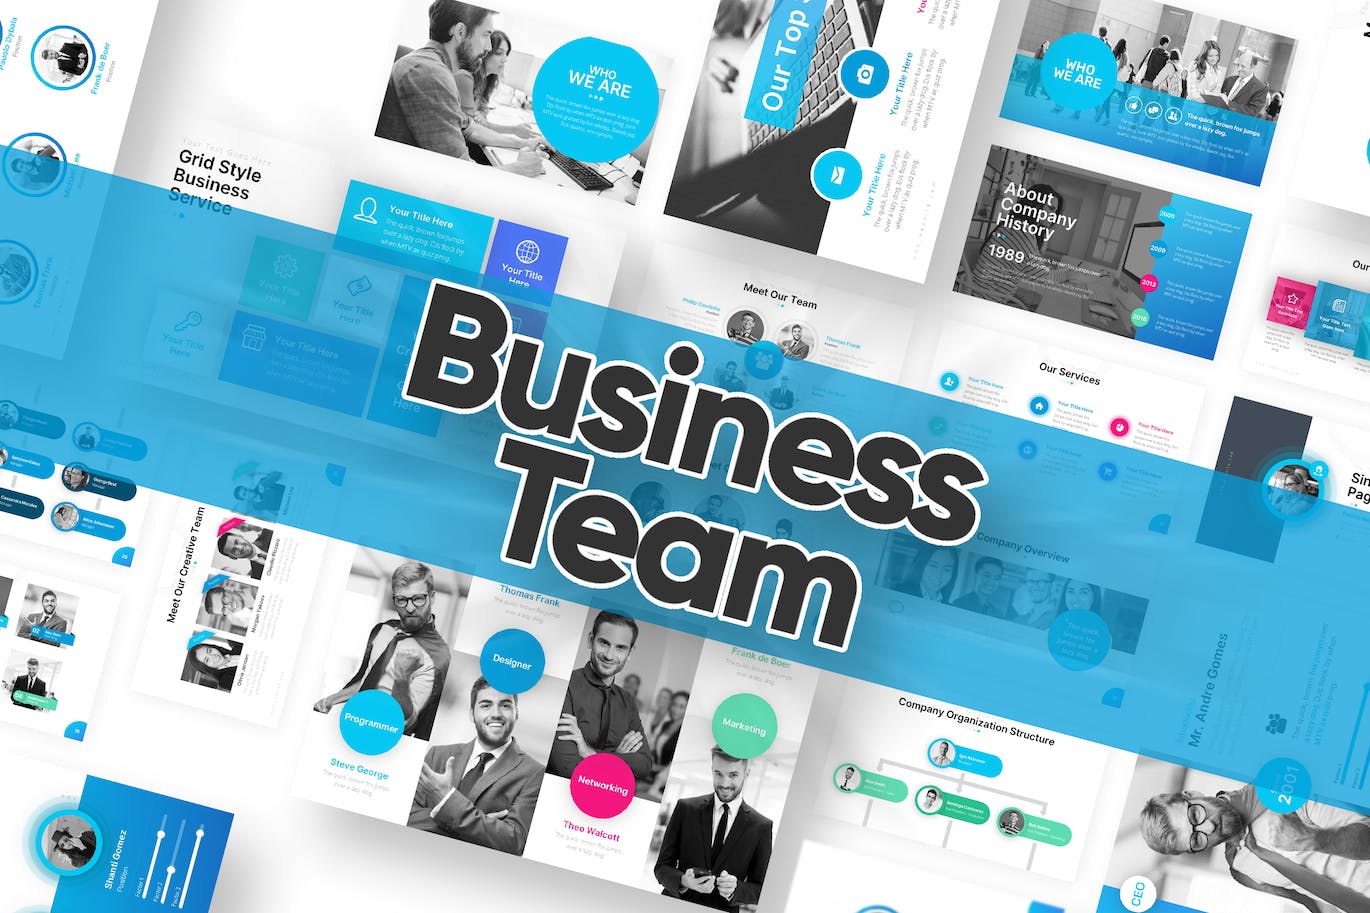 A set of images of elegant presentation template slides on the theme of a business team.